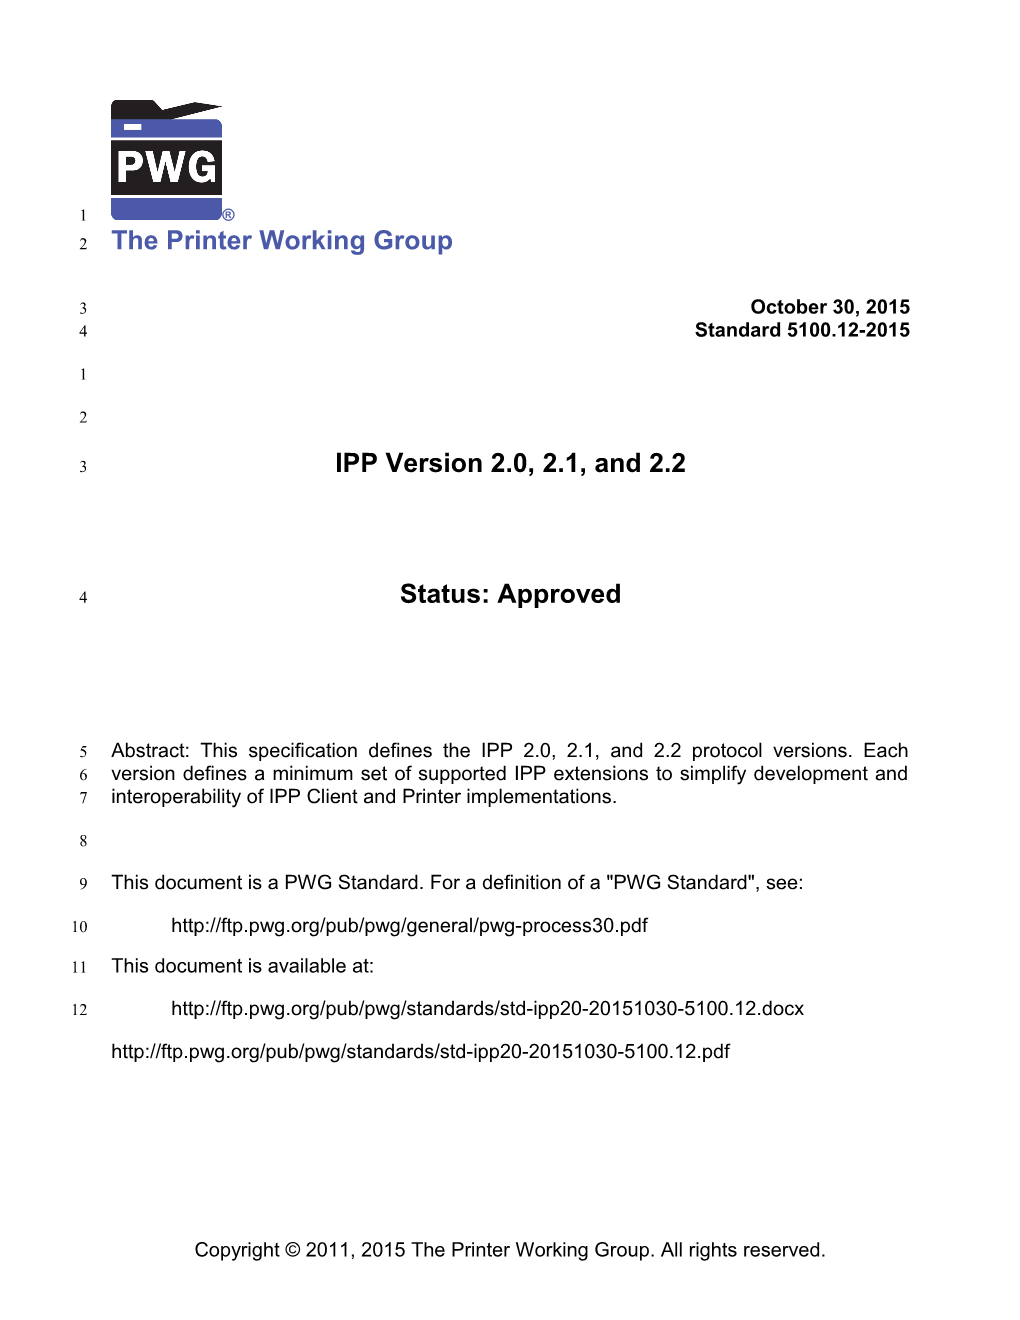 IPP Version 2.0, 2.1, and 2.2